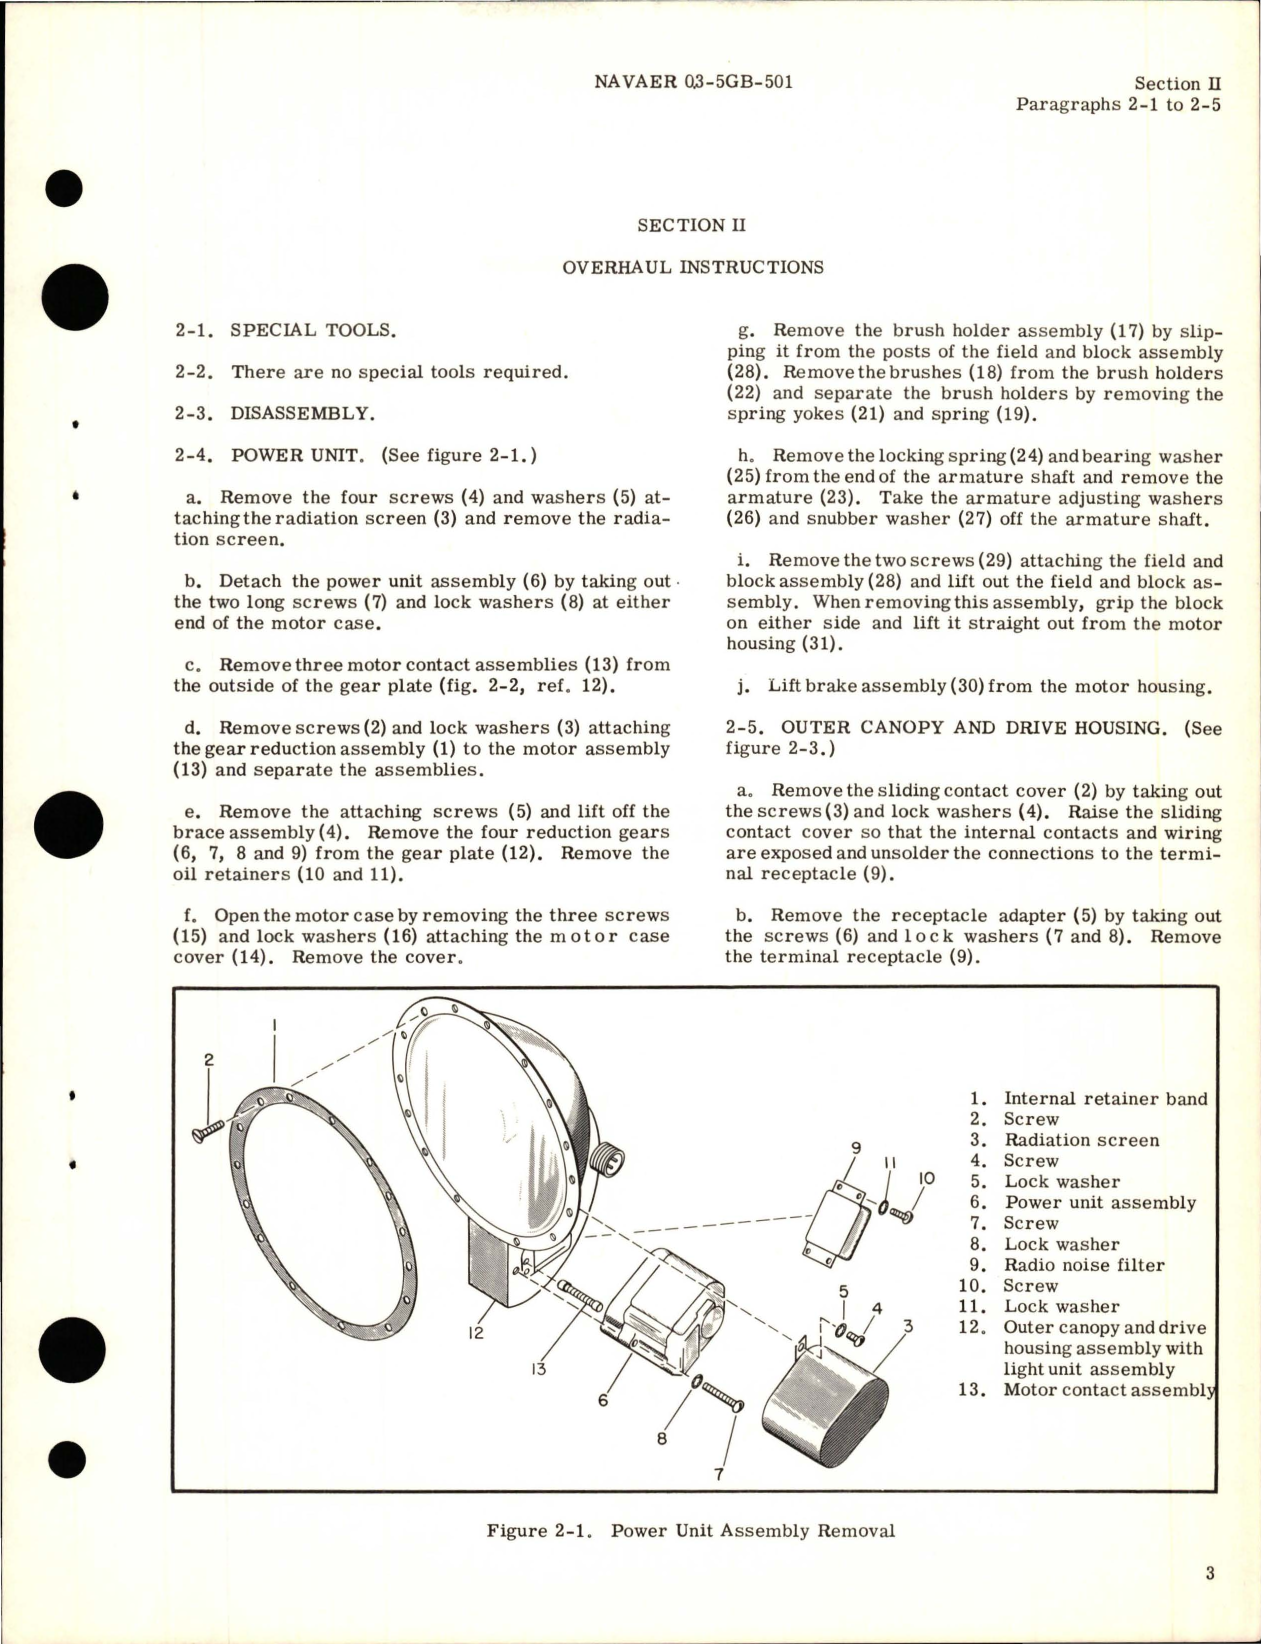 Sample page 7 from AirCorps Library document: Overhaul Instructions for Electrically Retractable Landing Lights - Parts G-4700-2, G-4700-3, G-4700-5, and G-4700-6